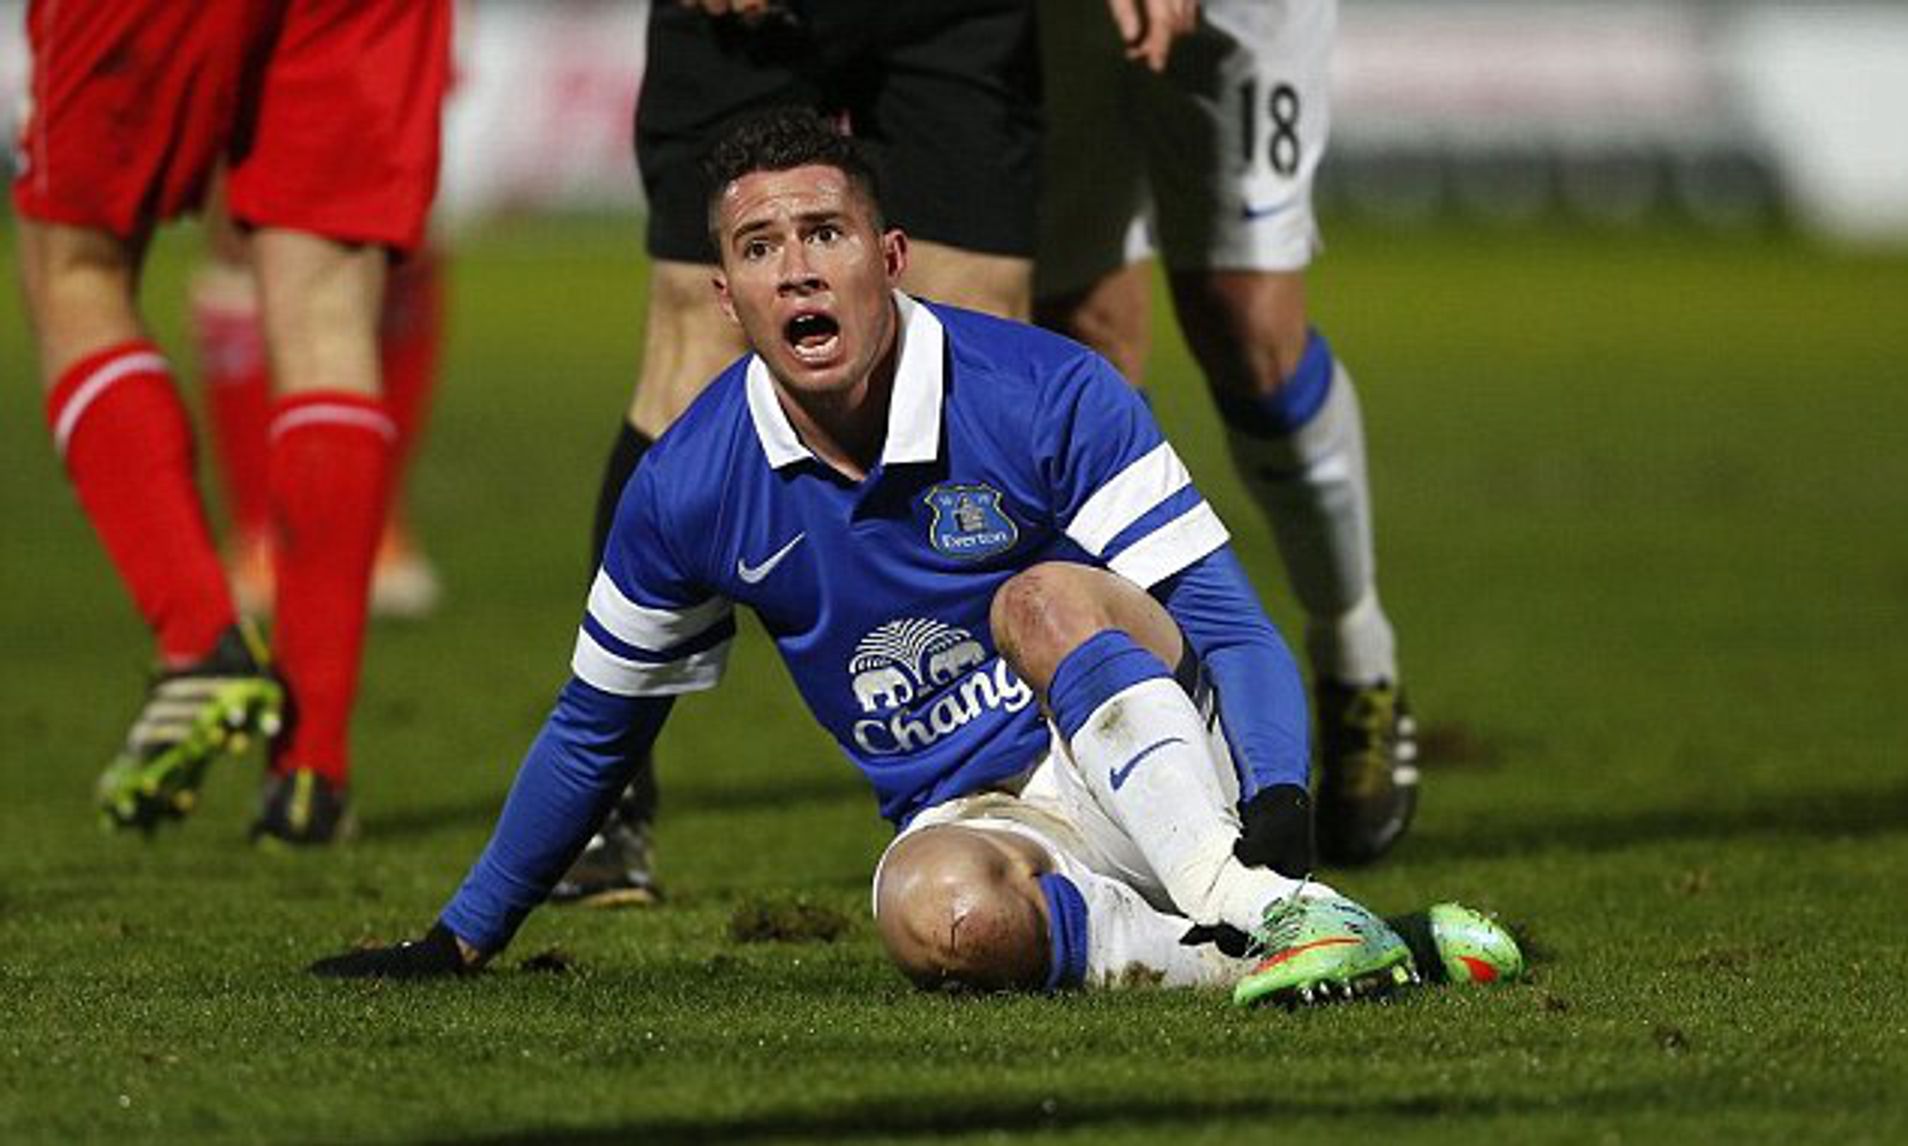 Everton's Bryan Oviedo on the mend after successful surgery on horrific double leg break | Daily Mail Online